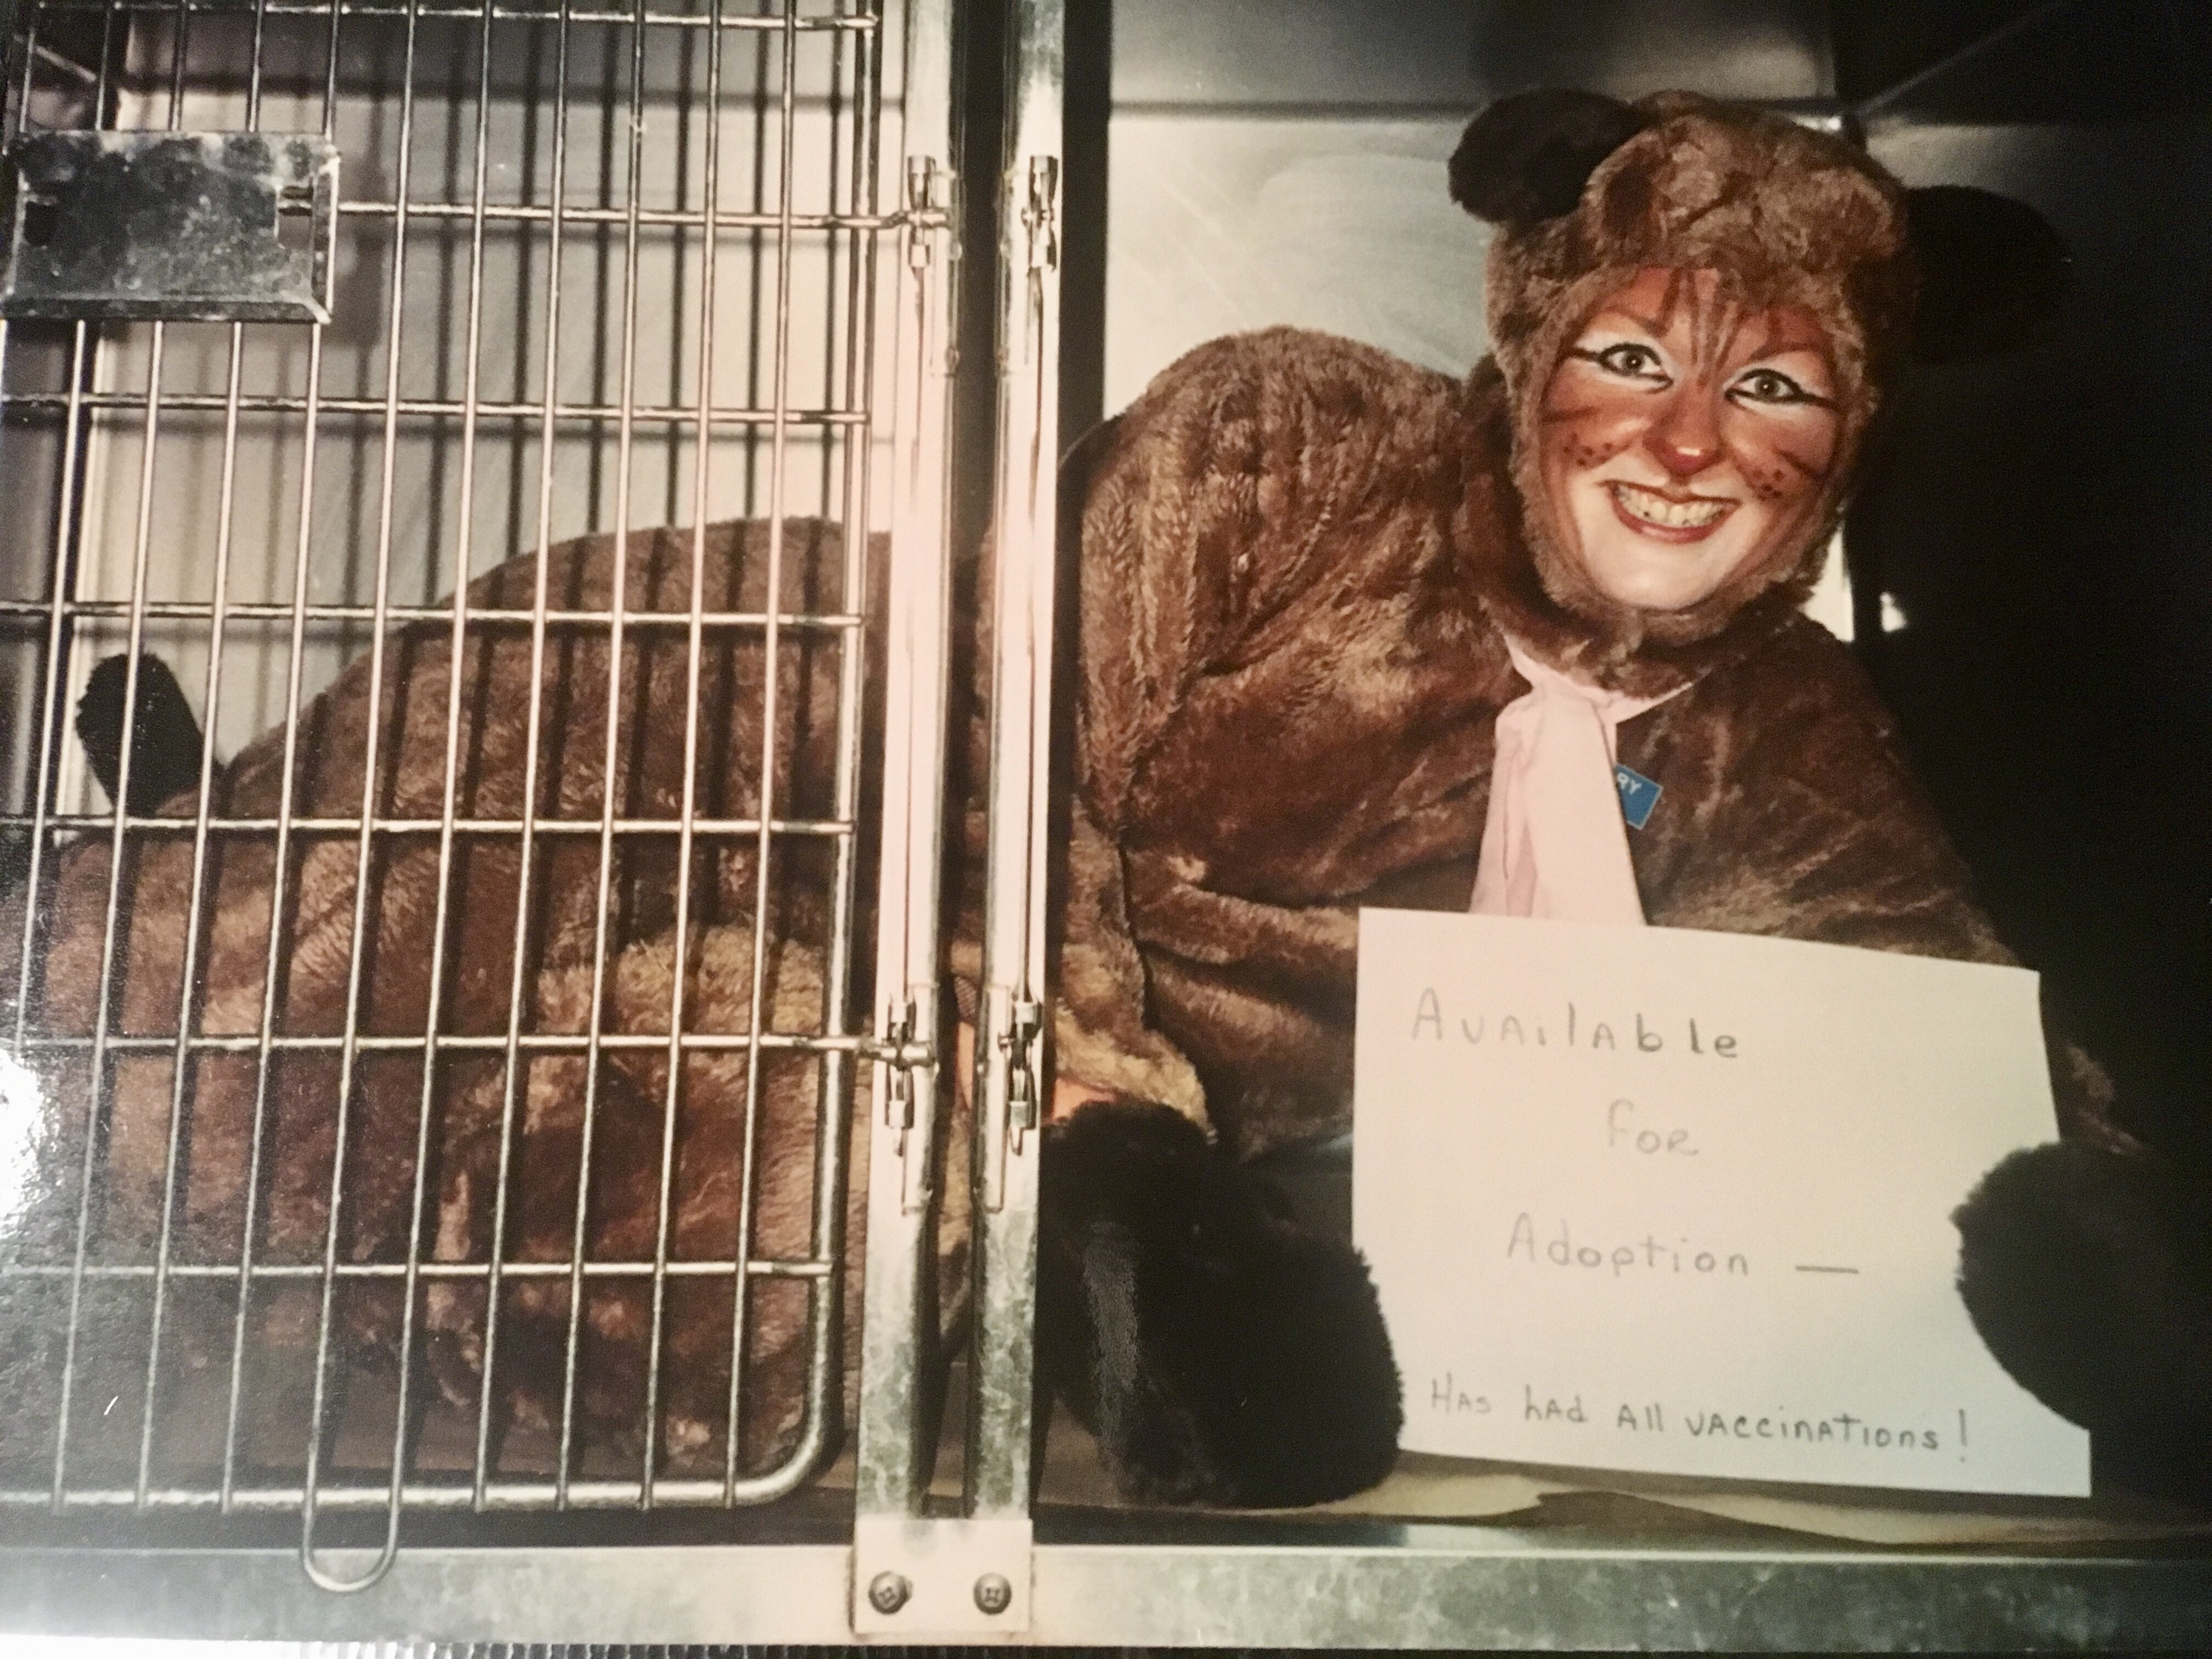 Rosemary dressed at cat Halloween 1989. 
Cats and Halloween